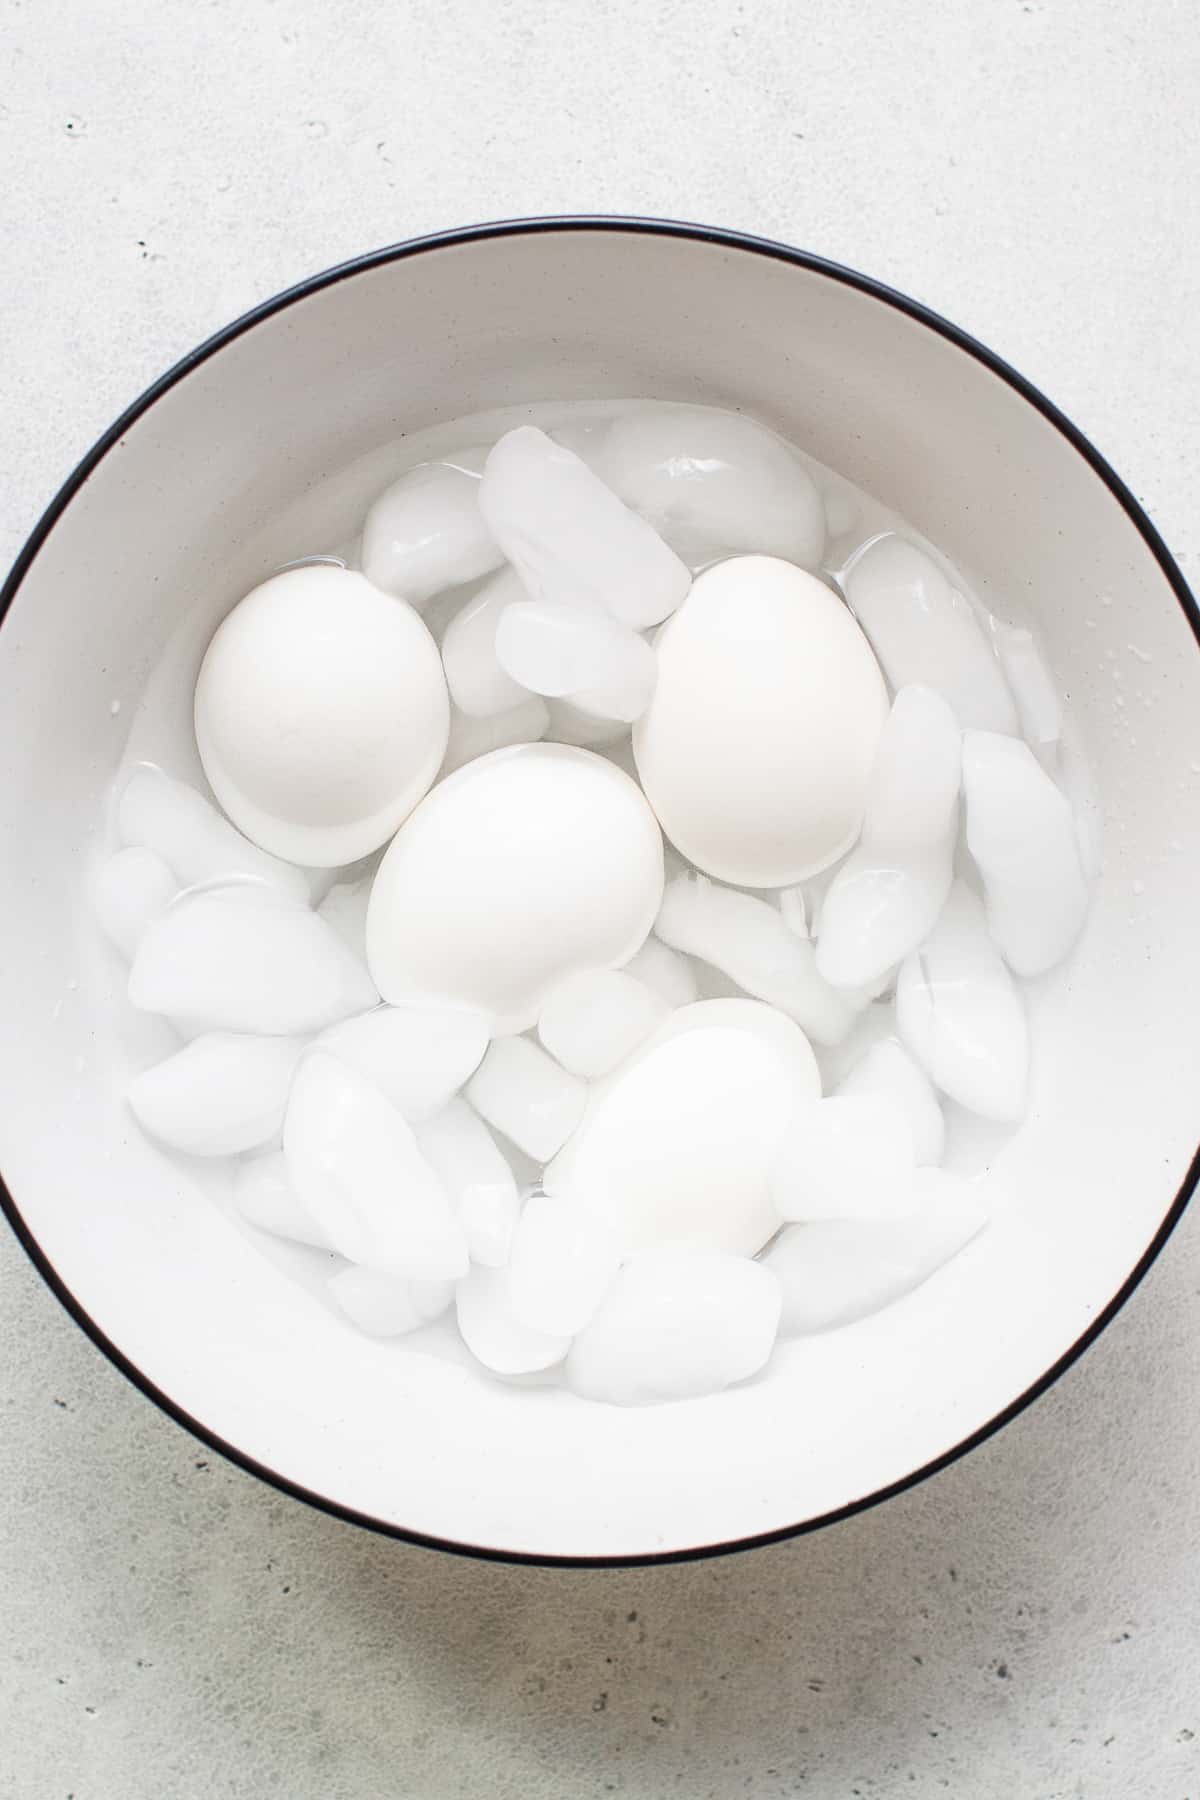 Soft boiled eggs in a bowl with ice.